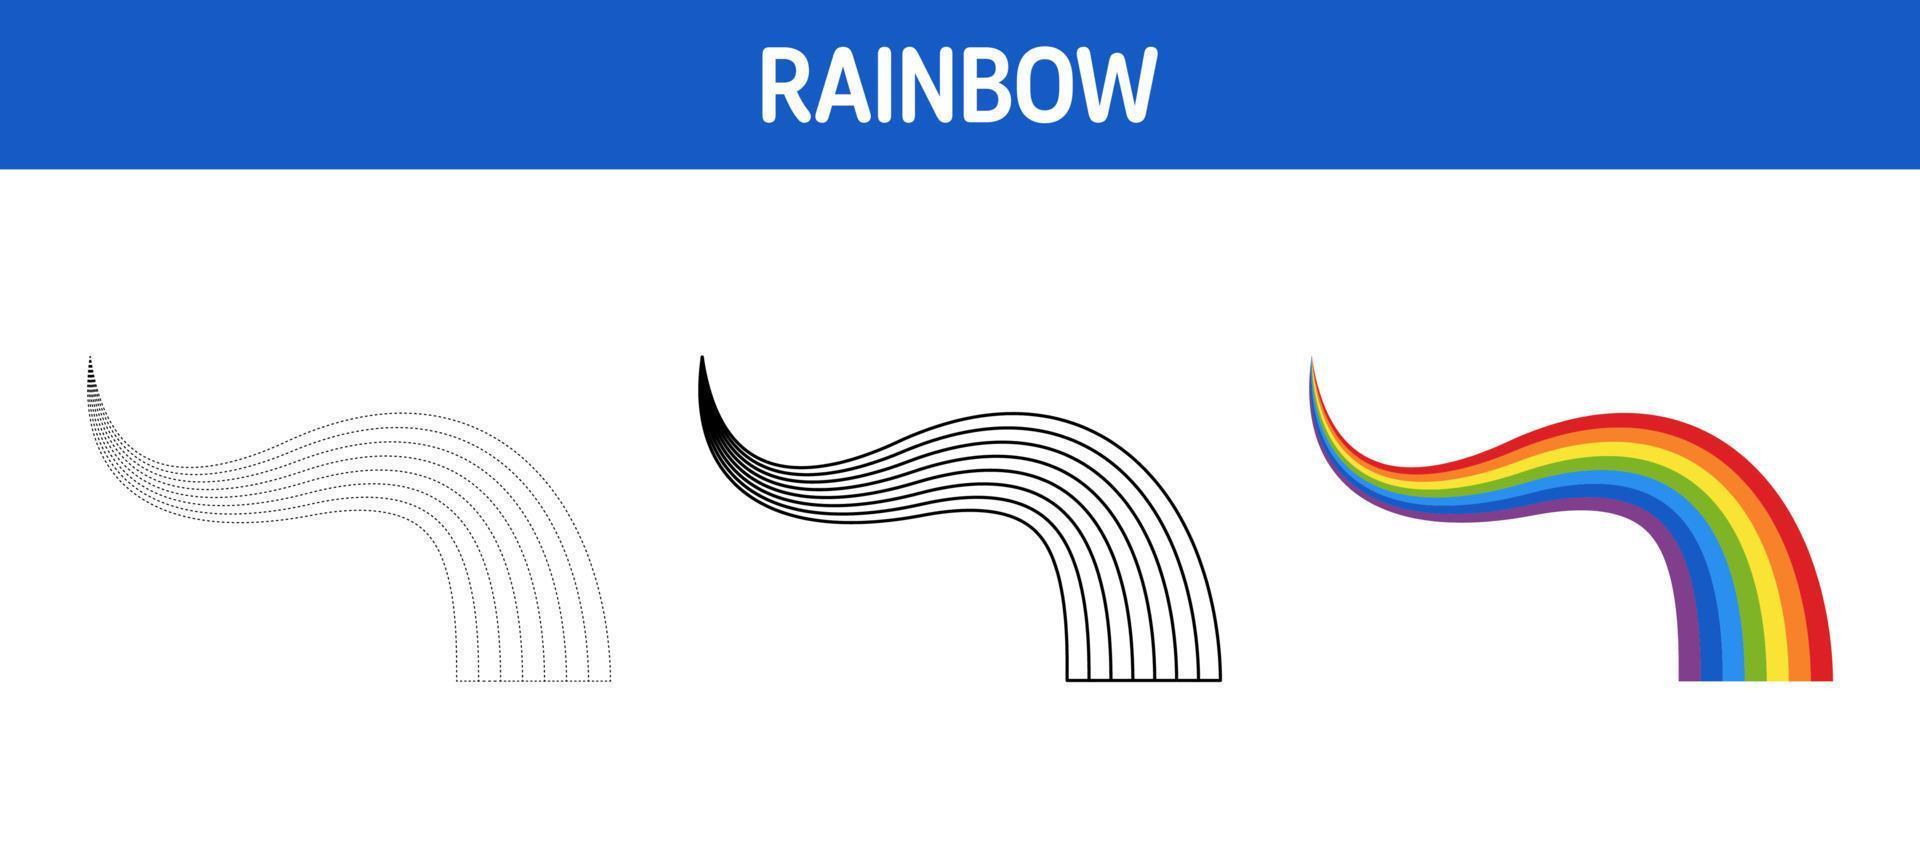 Rainbow tracing and coloring worksheet for kids vector